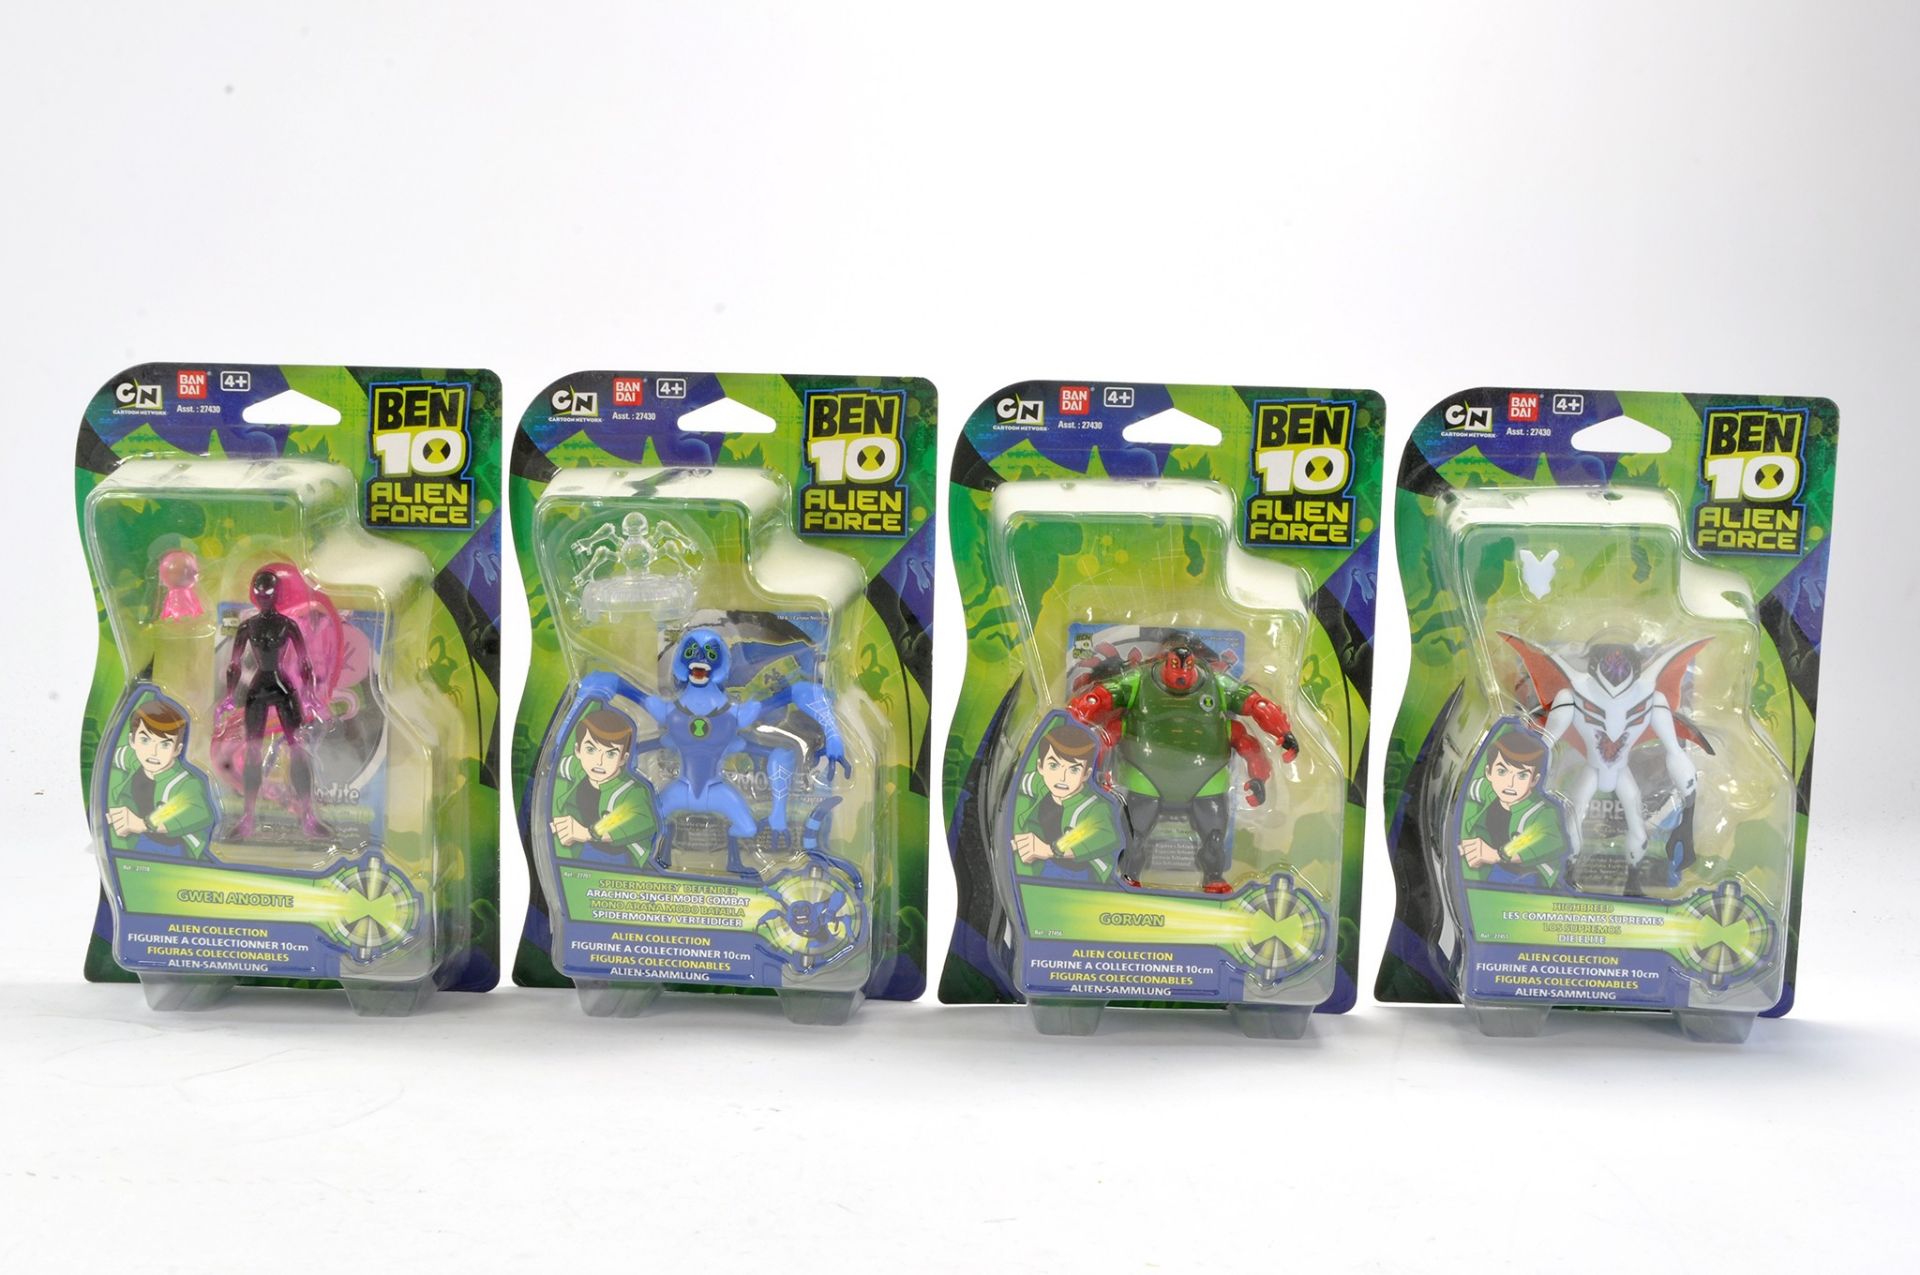 Bandai Cartoon Network Ben 10 Alien Force Carded Figures comprising Highbreed, Spidermonkey and Gwen